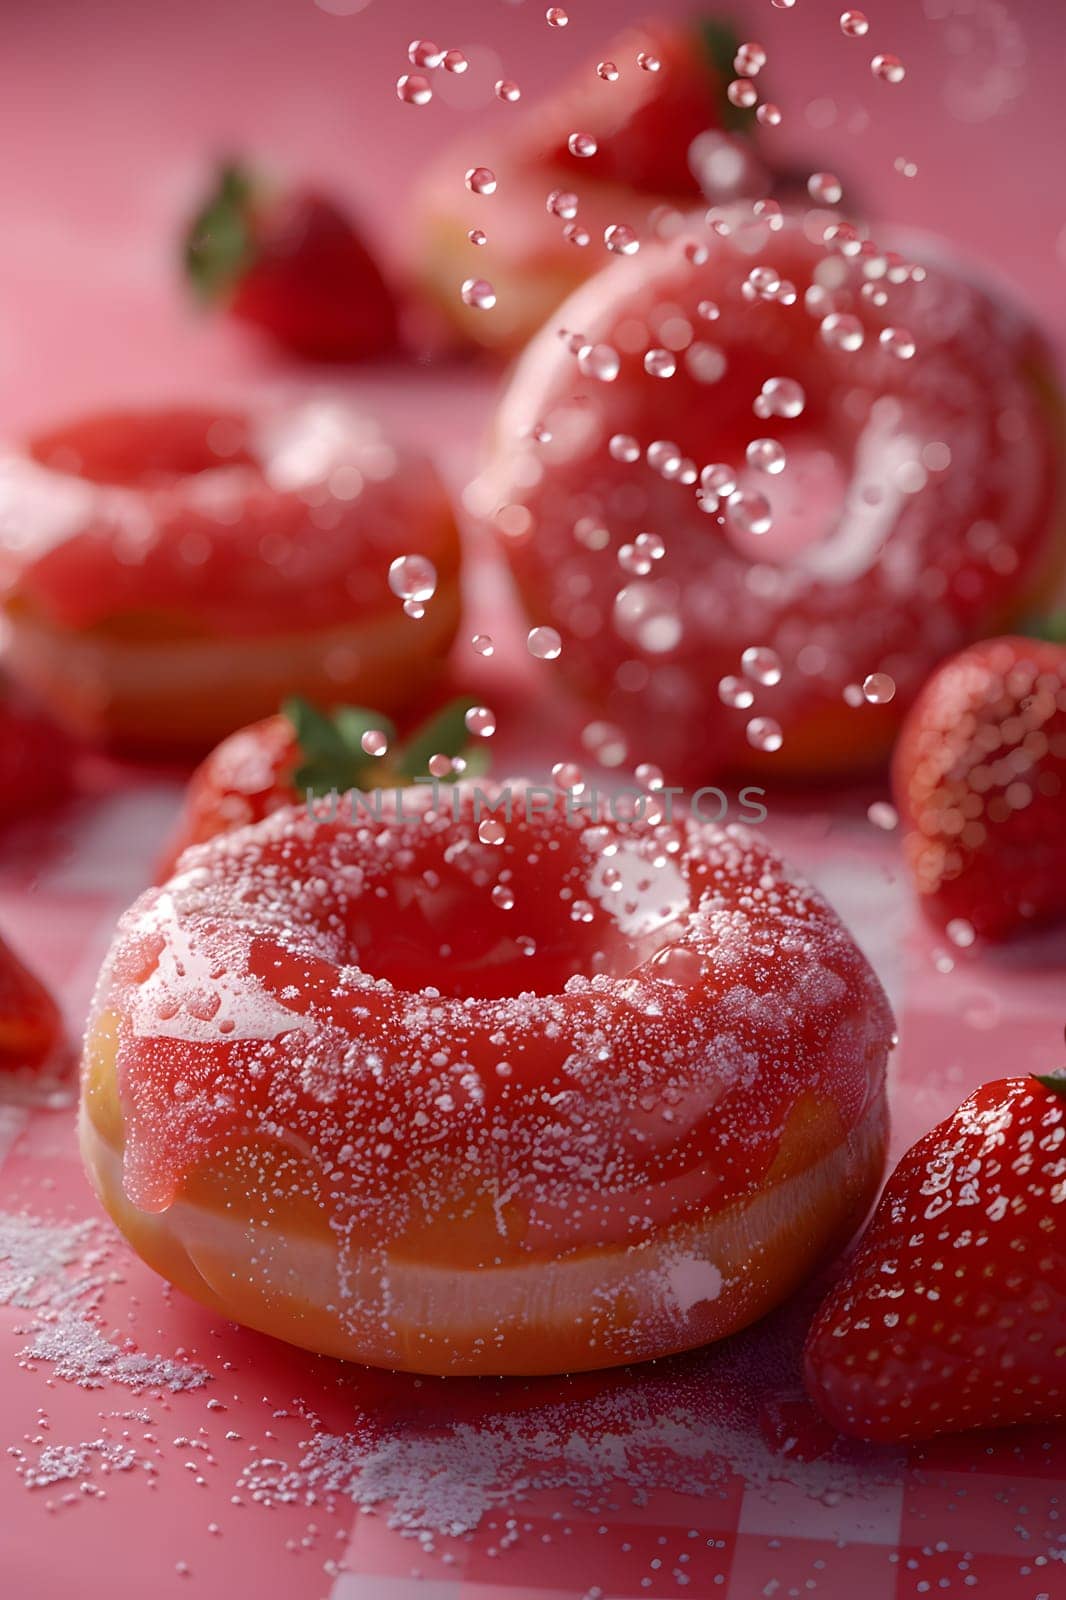 Delight in strawberry donuts topped with powdered sugar, with fresh strawberries in the background. This baked goods recipe includes natural fruit ingredients